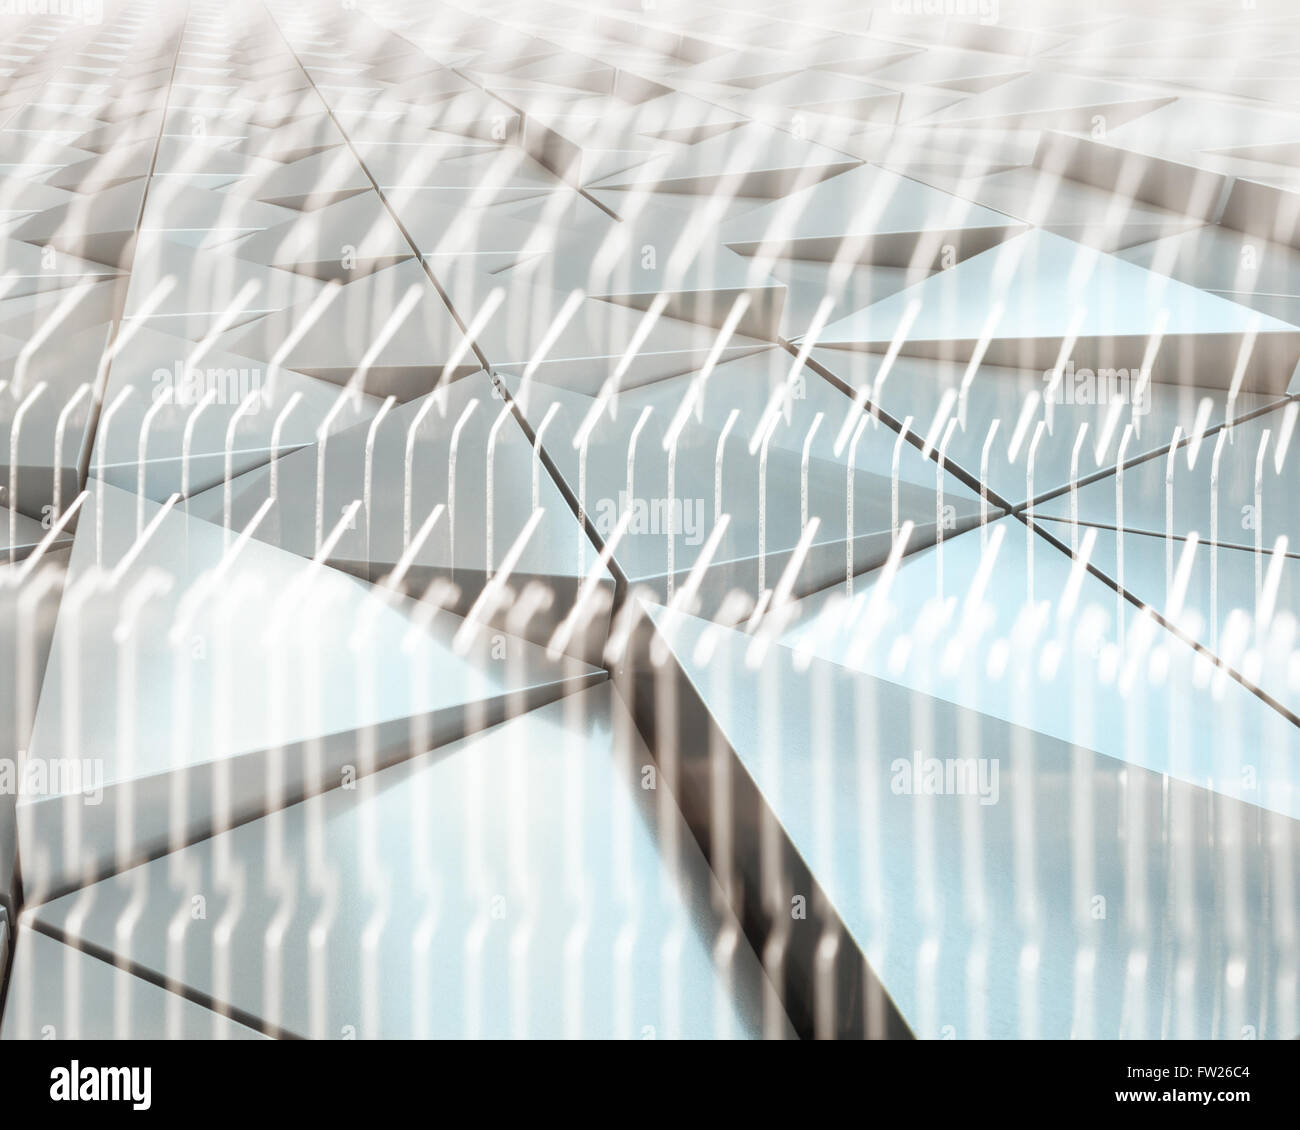 Abstract architectural pattern Stock Photo